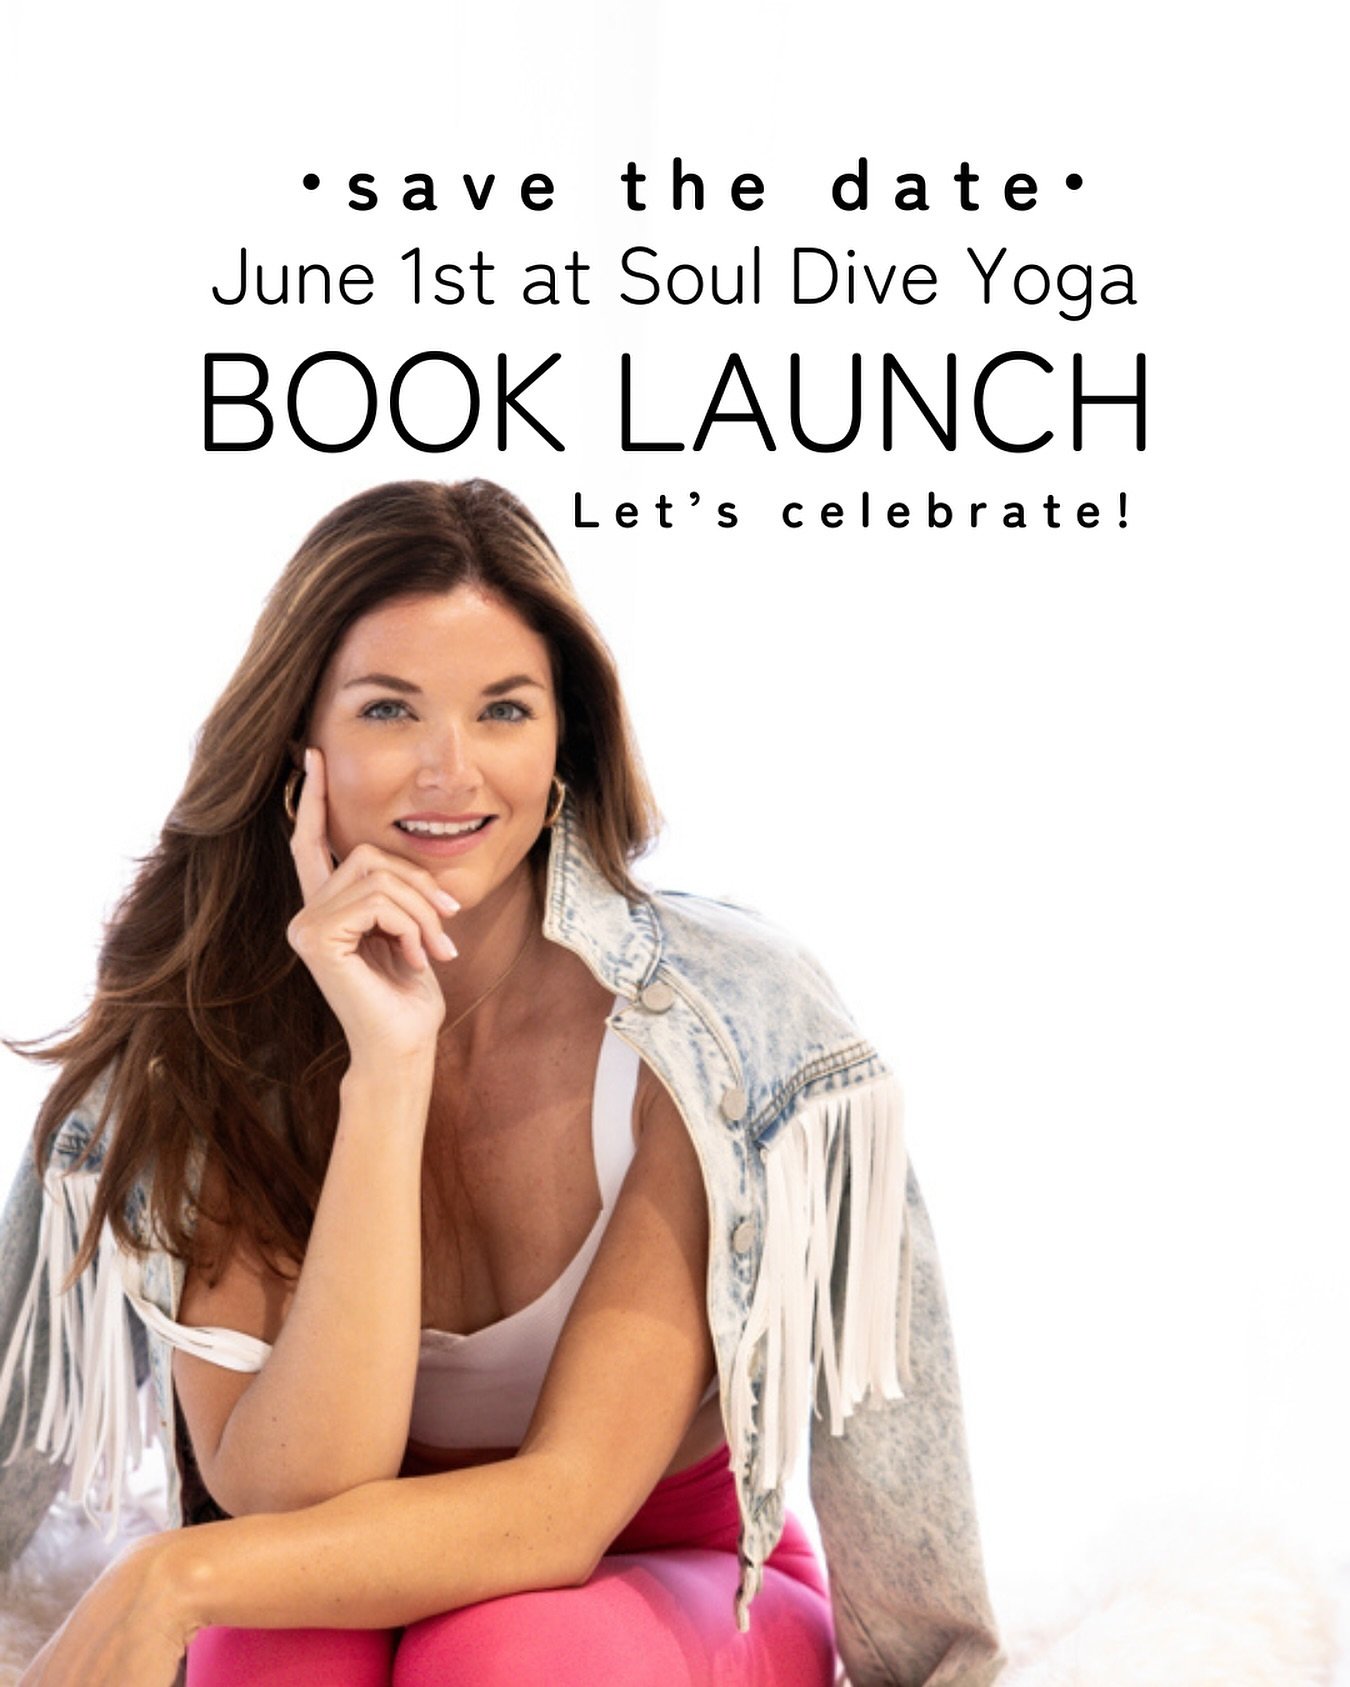 YOU&rsquo;RE INVITED!! Details below.👇🏻

You know how much we love a good dance party - on and off the mat!&nbsp;

Come celebrate with us!! 
Saturday, June 1st.
10am Soulful Vinyasa led by @alexsabbag 
11:30am Book Signing + Community Connection&nb